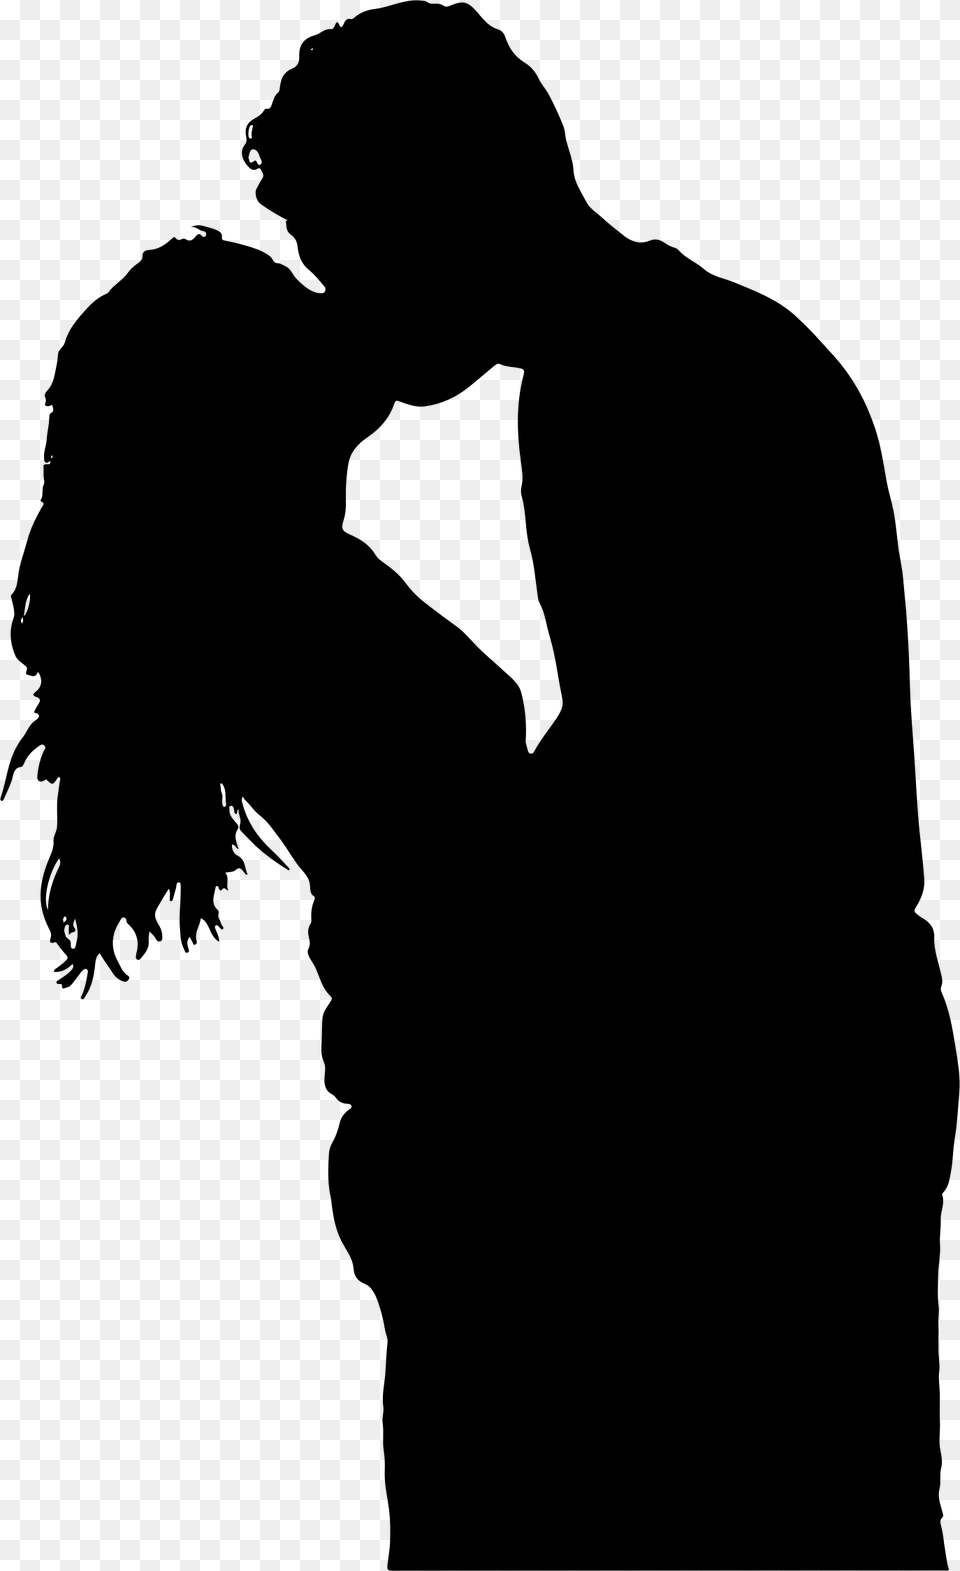 Couple Kissing Silhouette Cartoon Man And Woman Kissing Silhouette, Gray Free Transparent Png